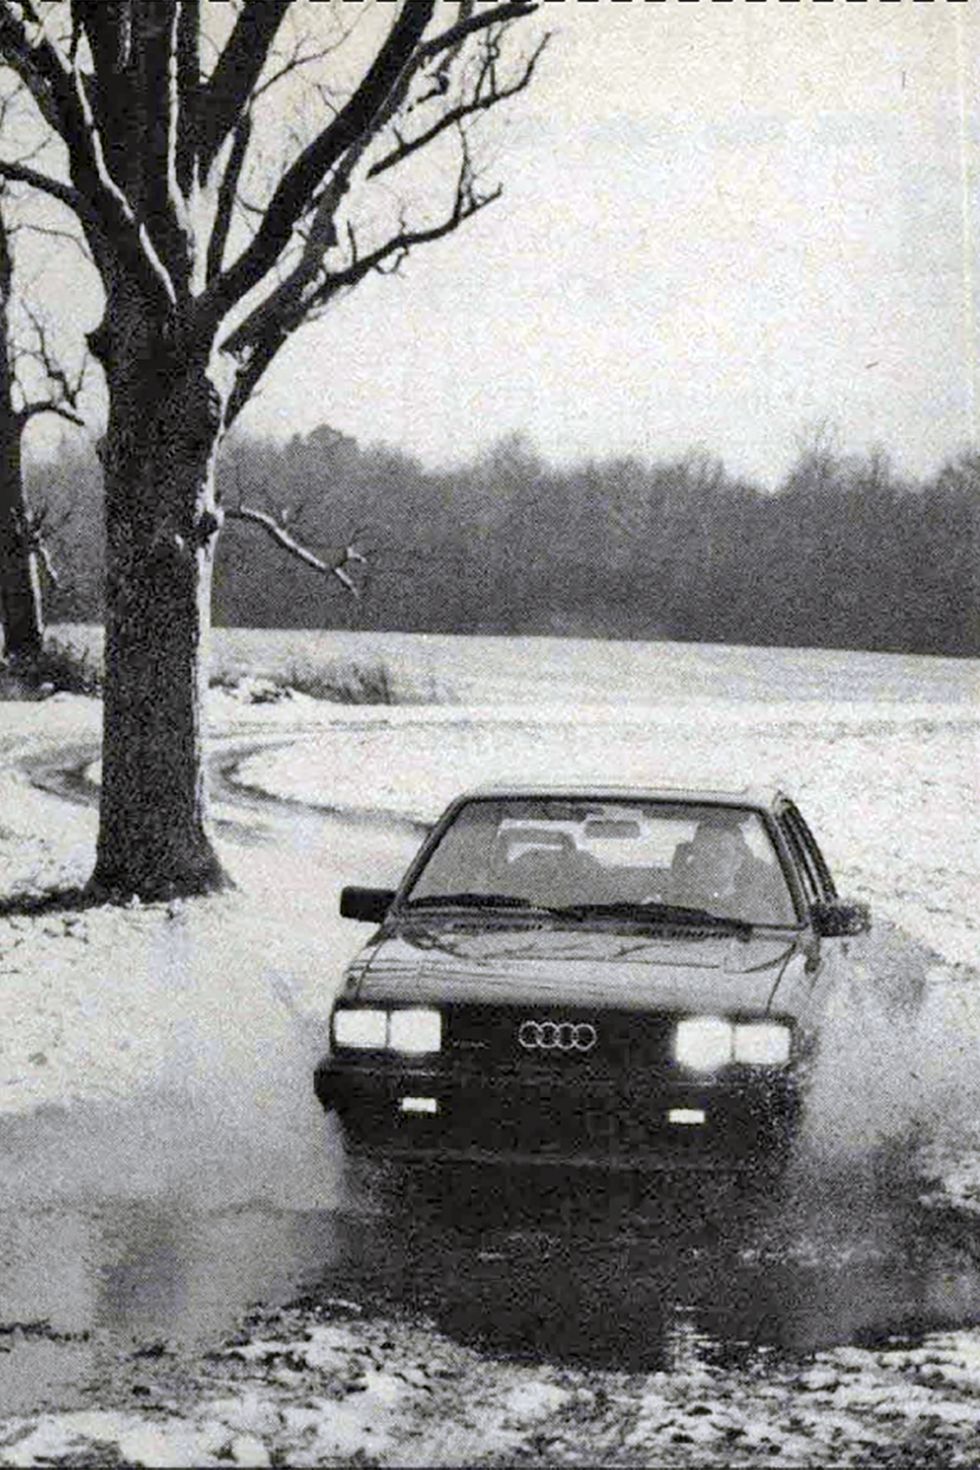 Tested: 1980 Audi 4000 Proves to Be Not Quite Ready for Prime Time